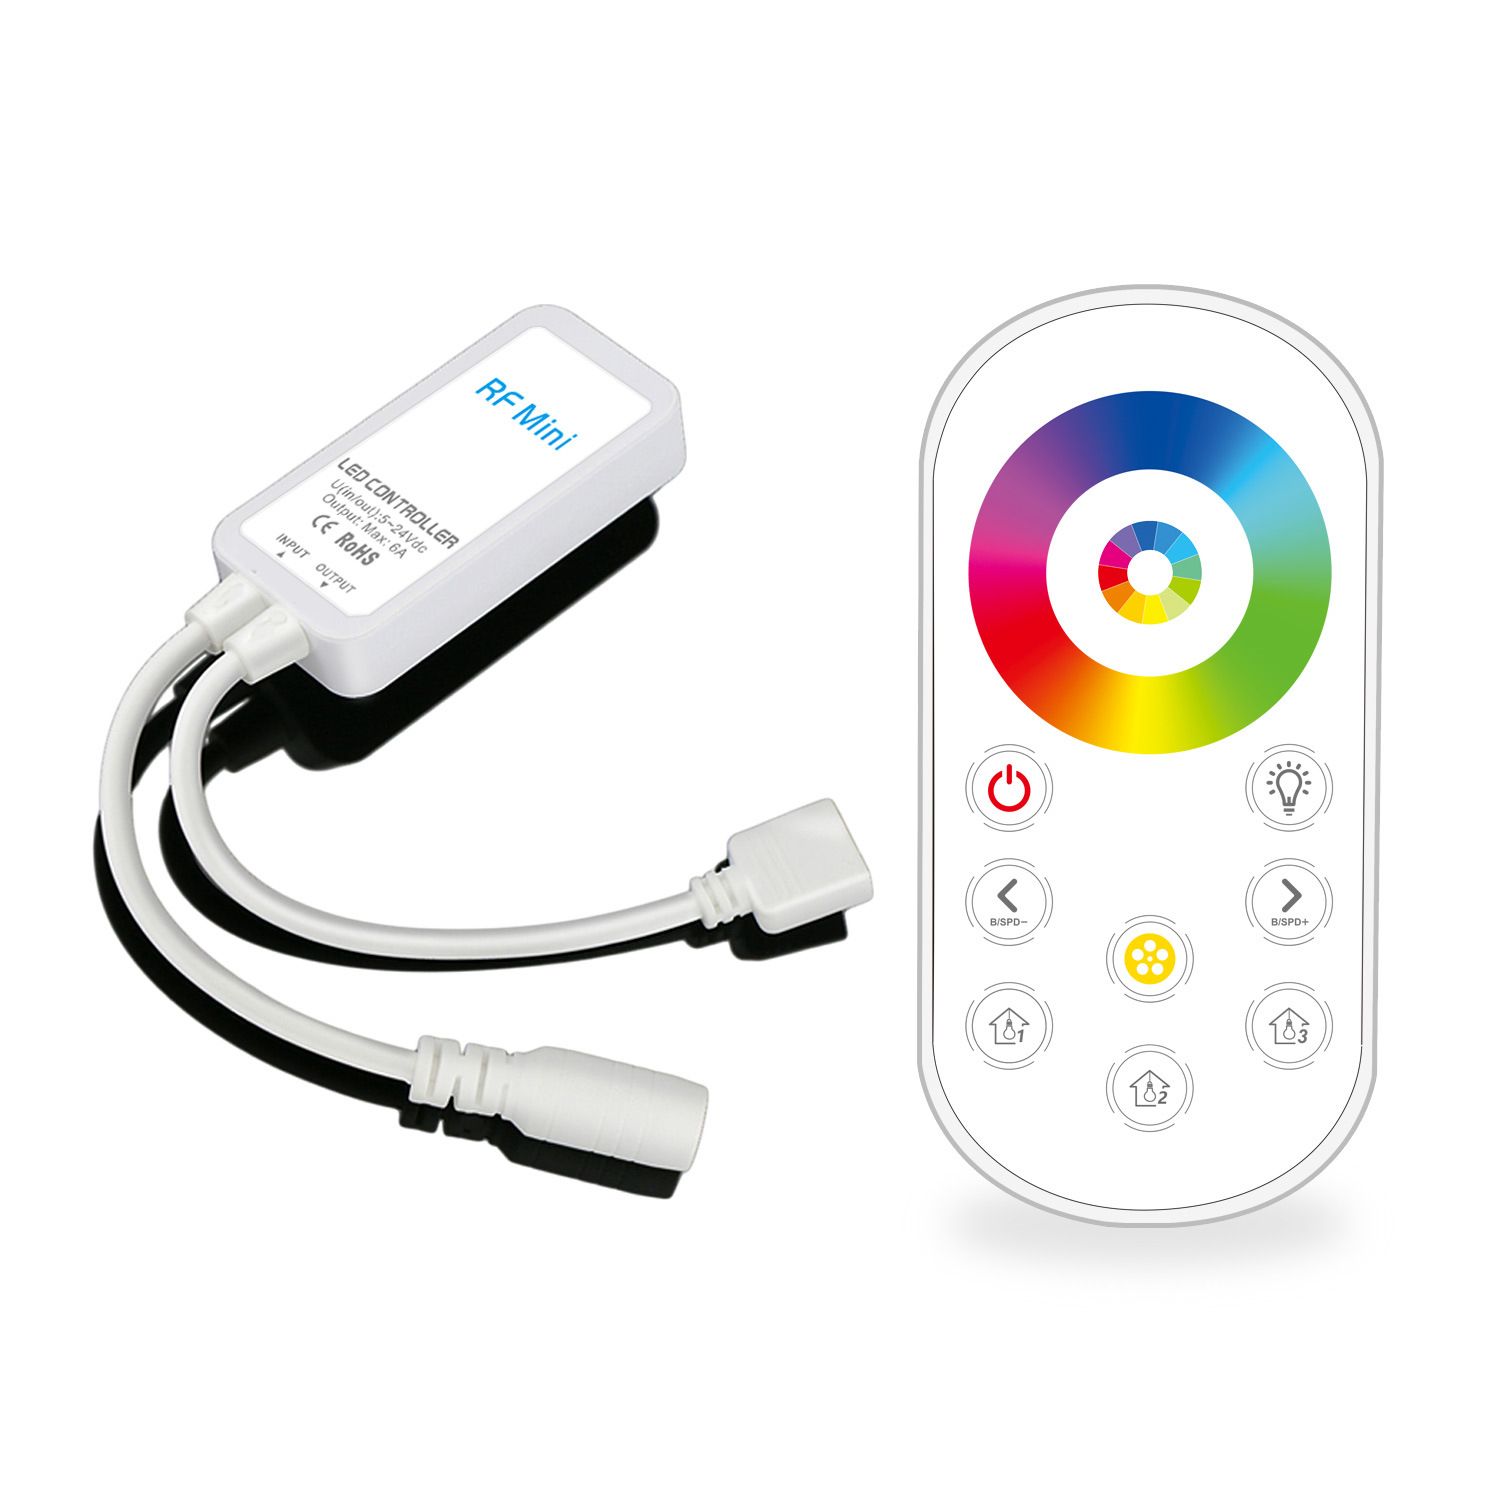 DC5-24V-Mini-Wireless-RF-RGBCCT-LED-Dimmer-Controller-Touch-Remote-Control-for-Strip-Light-1536524